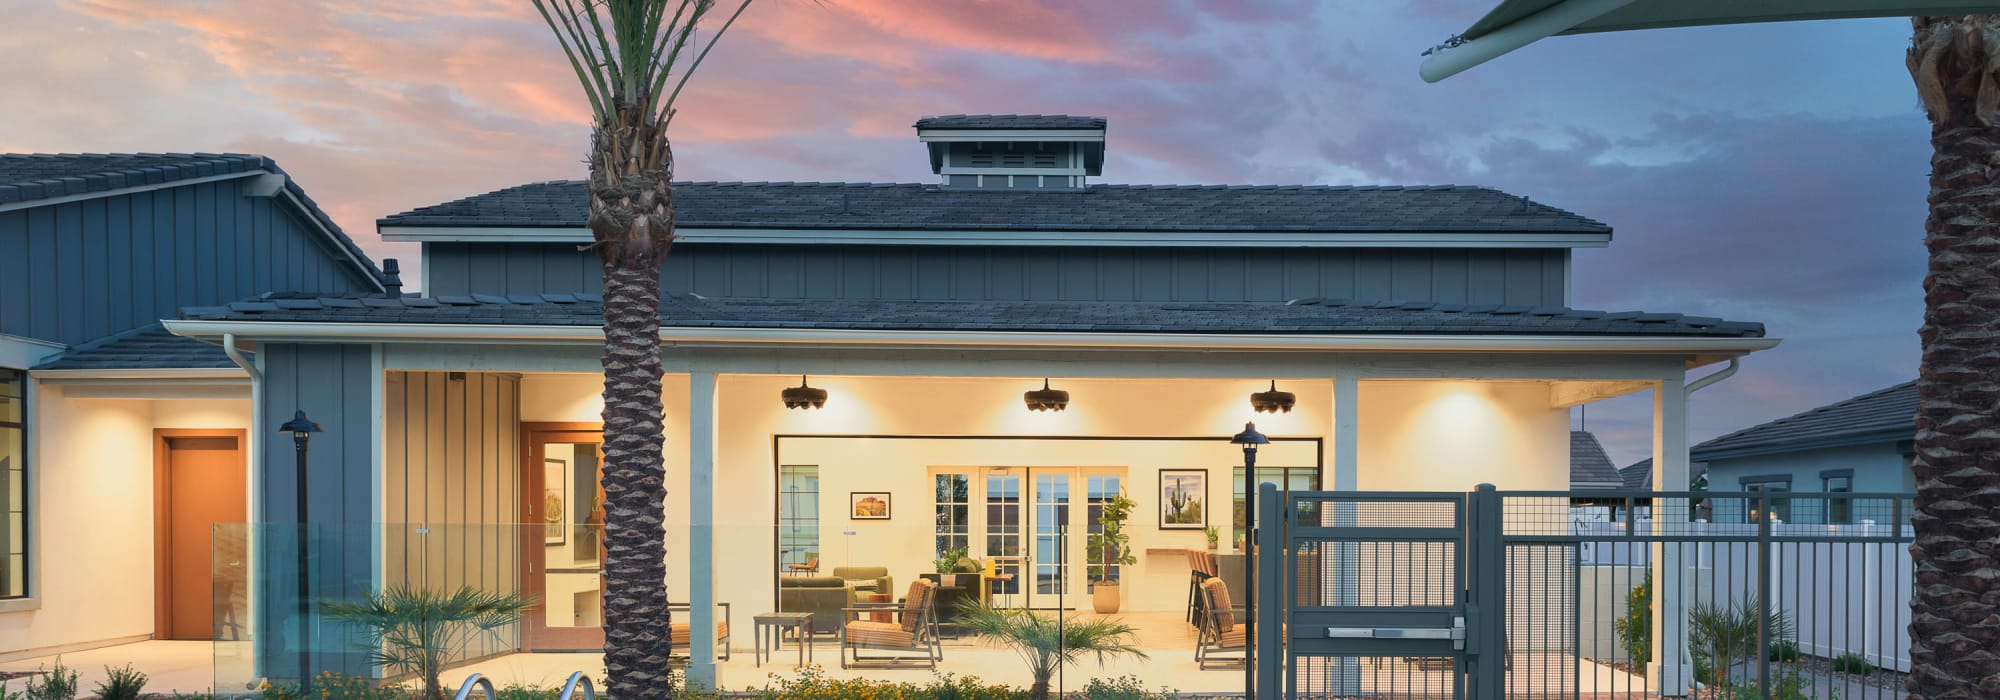 Exterior view of the poolside resident lounge at Sobremesa Villas in Surprise, Arizona